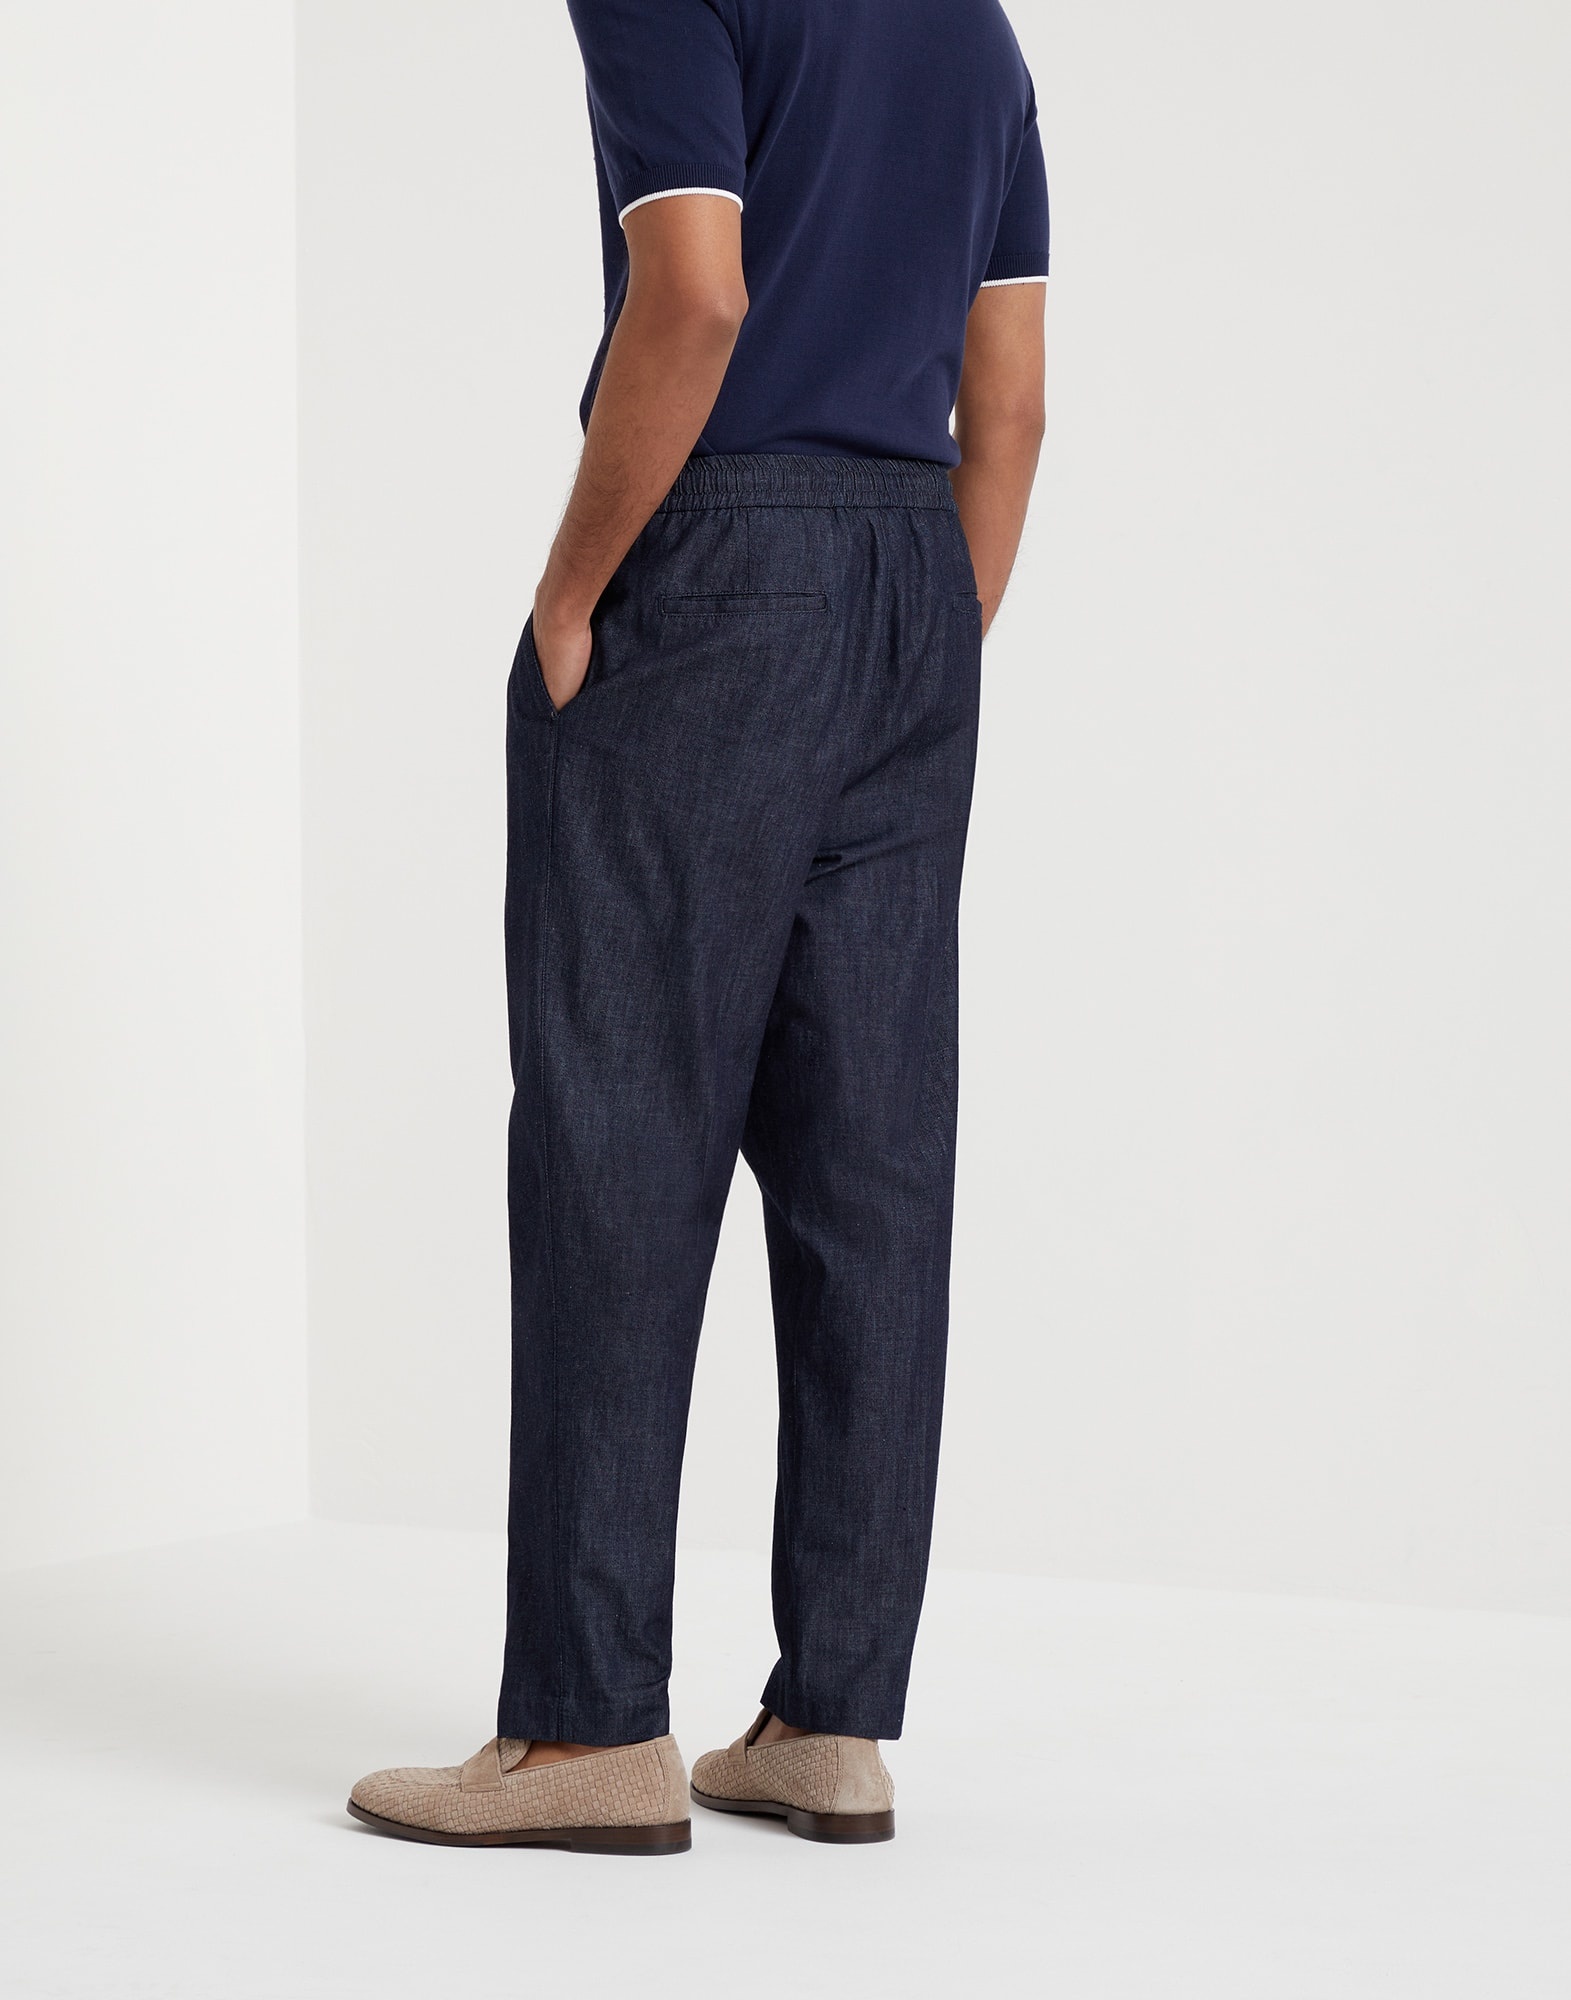 Lightweight denim leisure fit trousers with drawstring and double pleats - 2